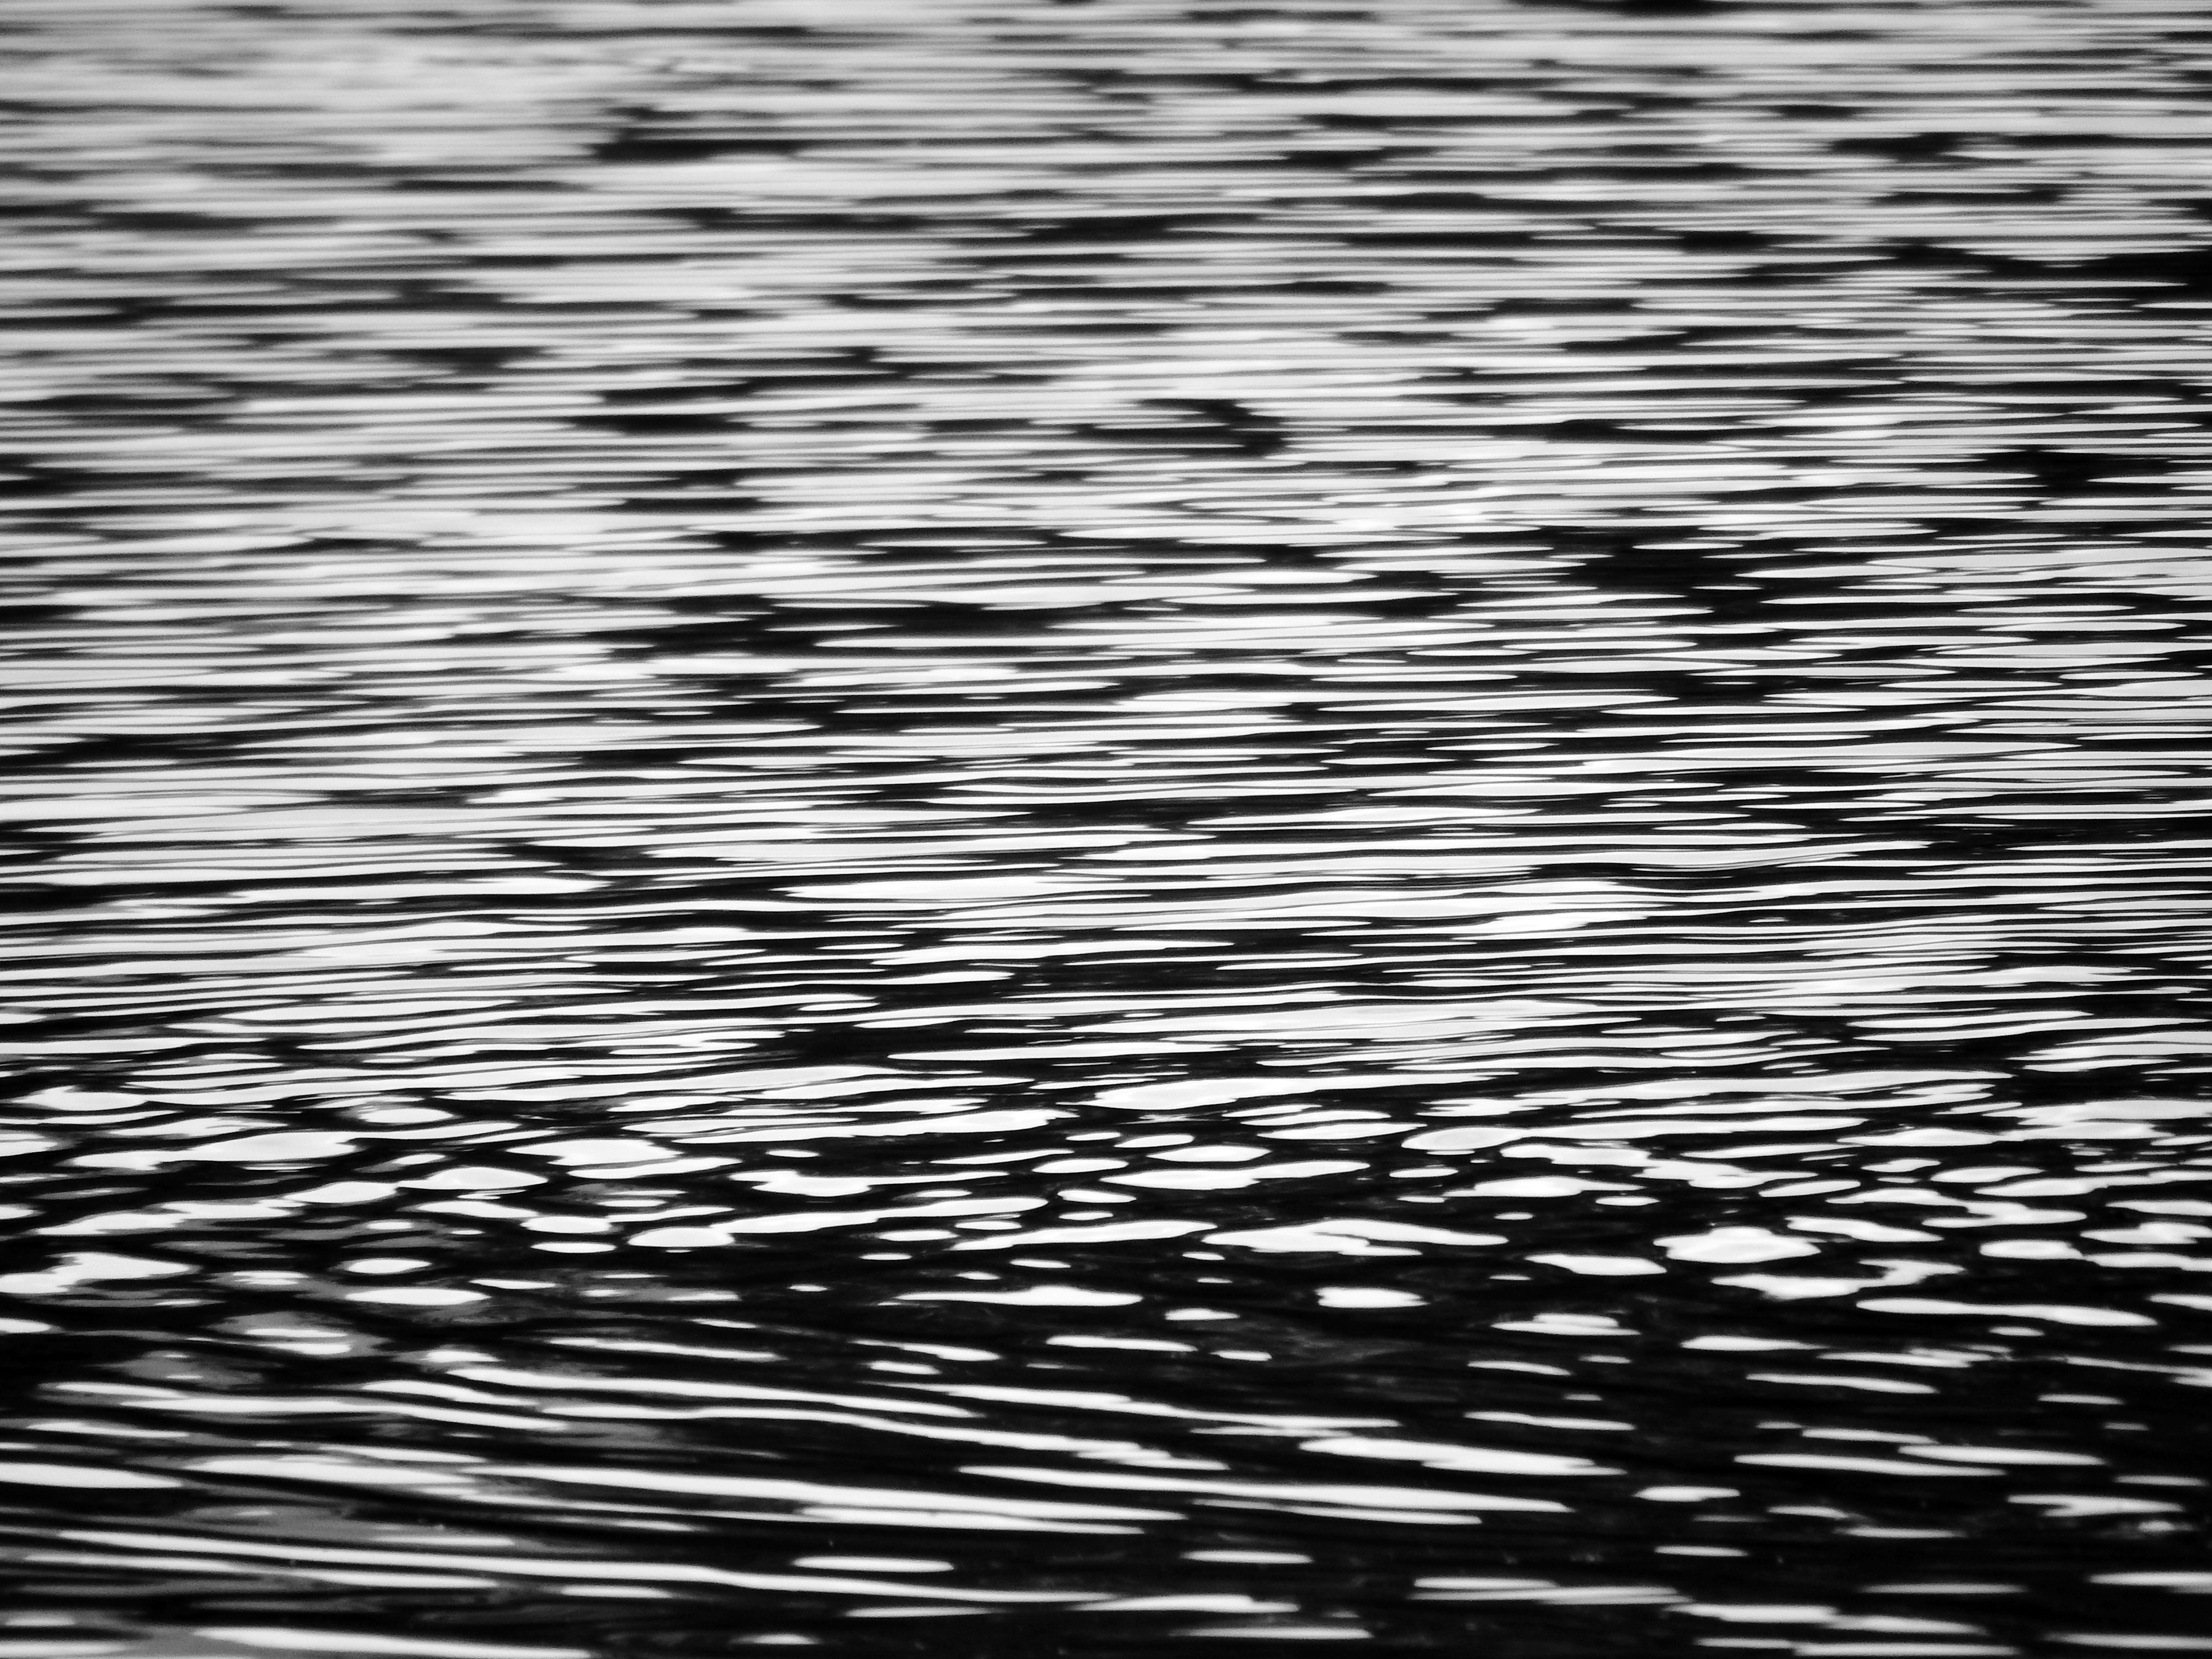 Abstract water ripples background, Abstractbackgrou, Spa, Rainreflection, Reflection, HQ Photo